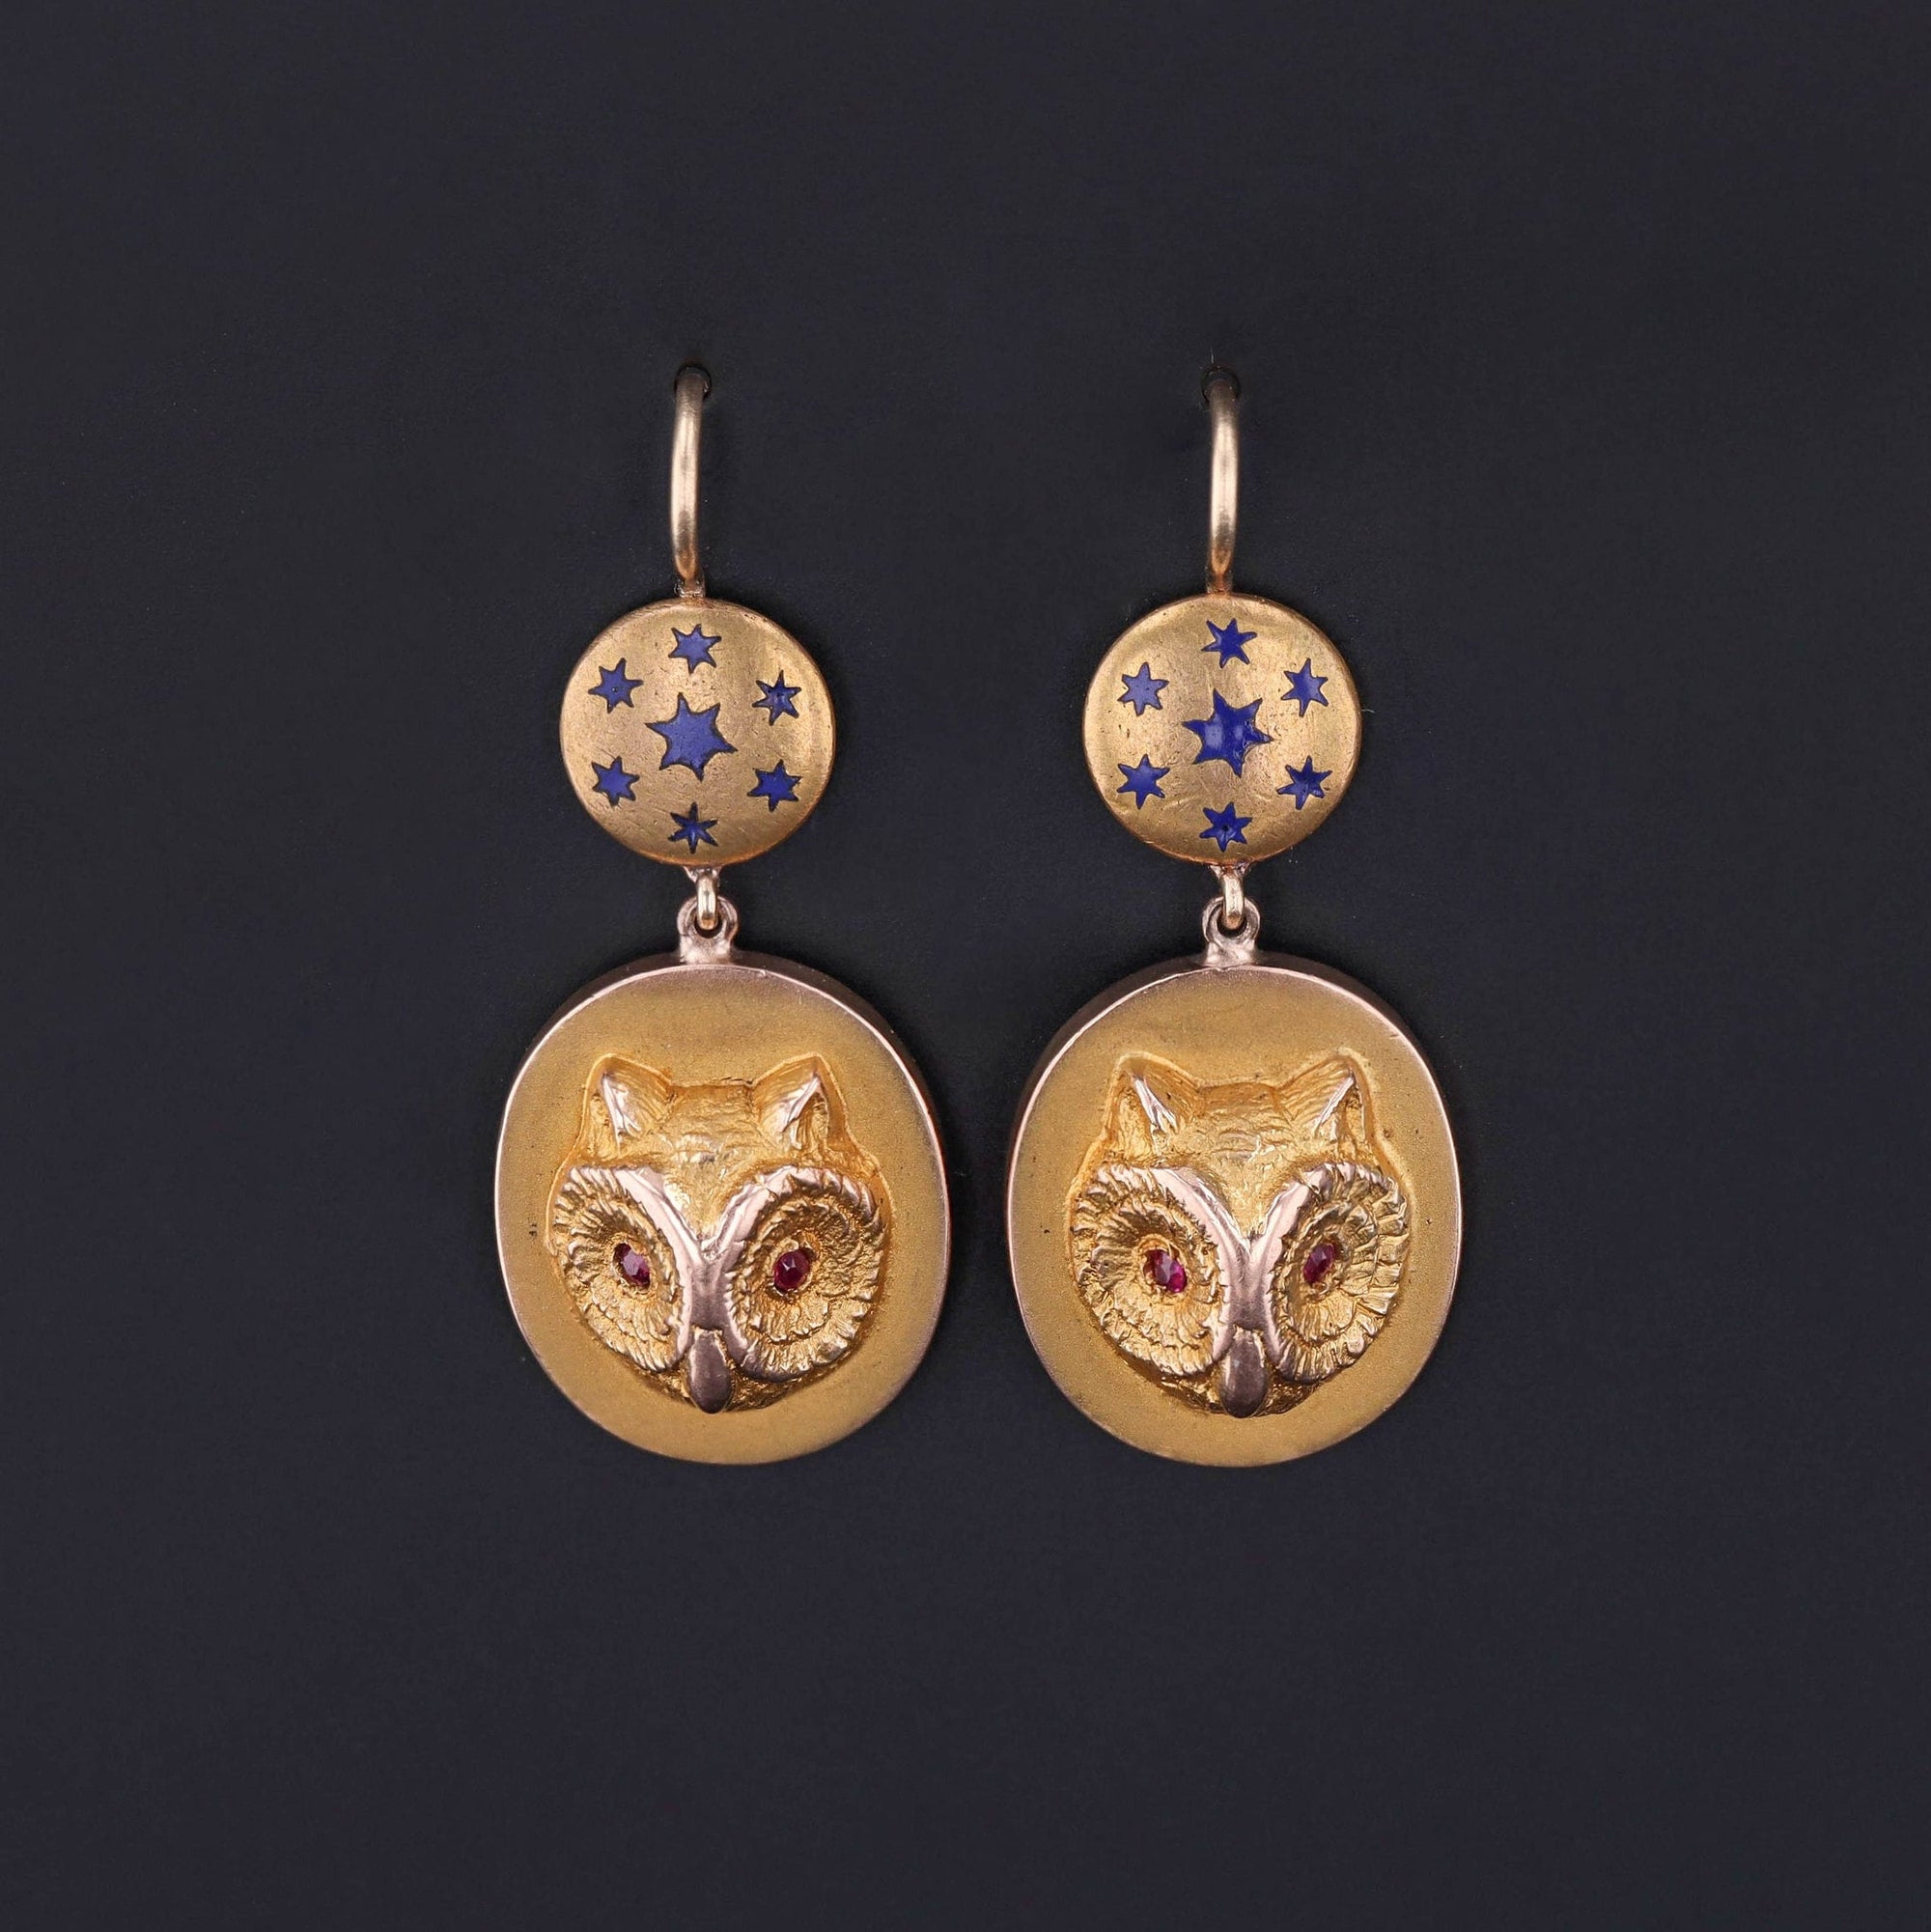 Antique Owl Conversion Earrings of 14k Gold